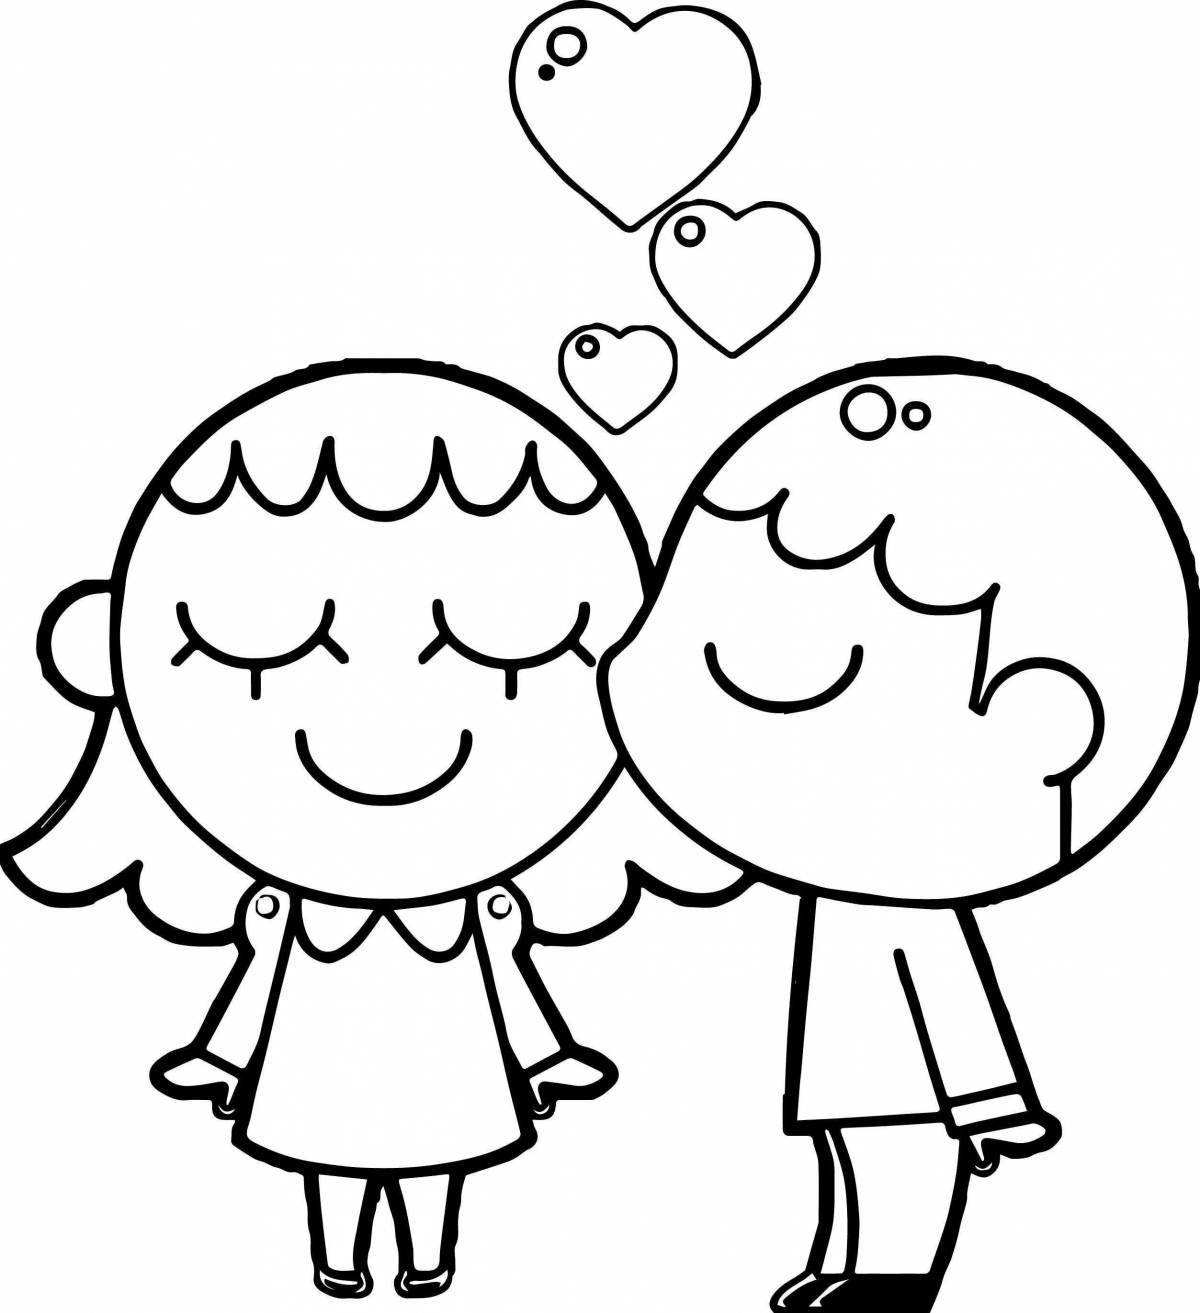 Dreamy couple coloring pages